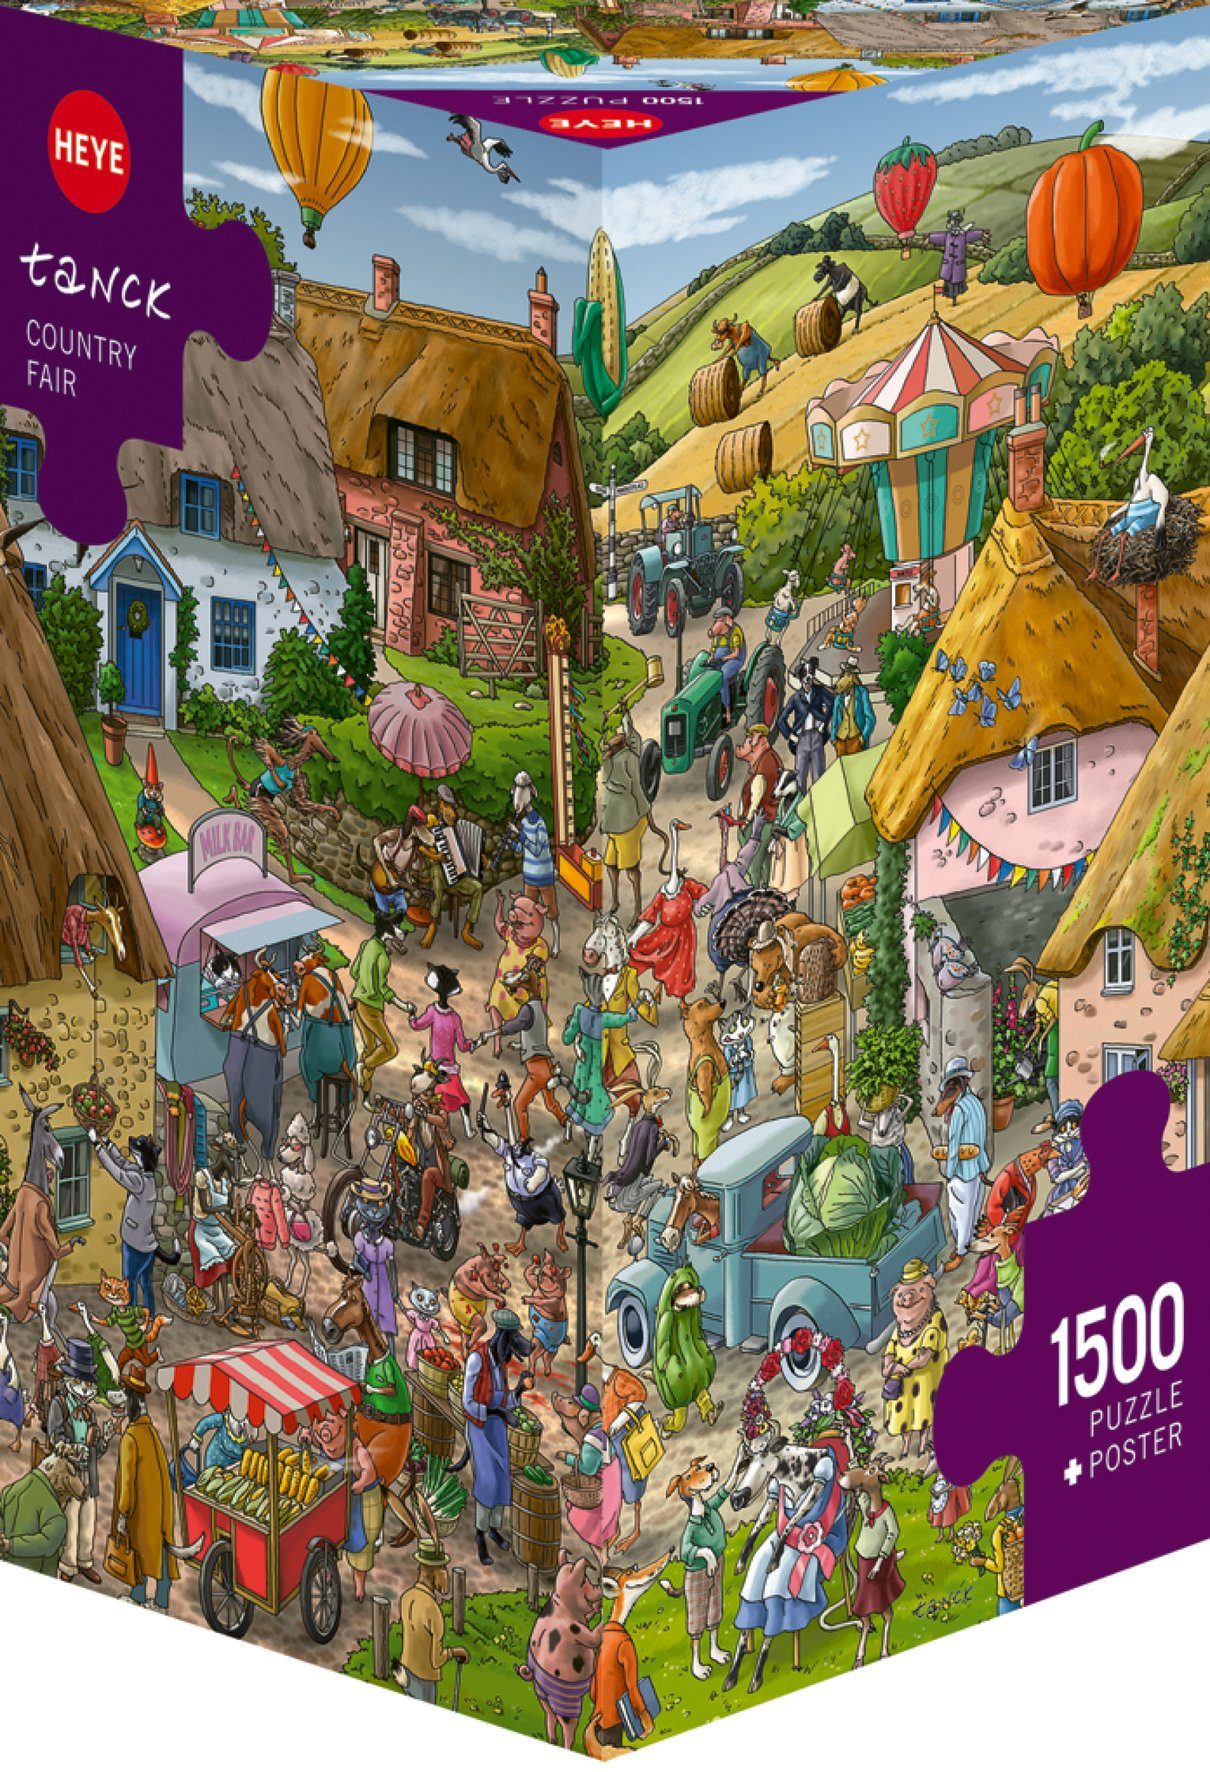 HEYE Puzzle Country Fair, Tanck, Made Europe 1500 in Puzzleteile